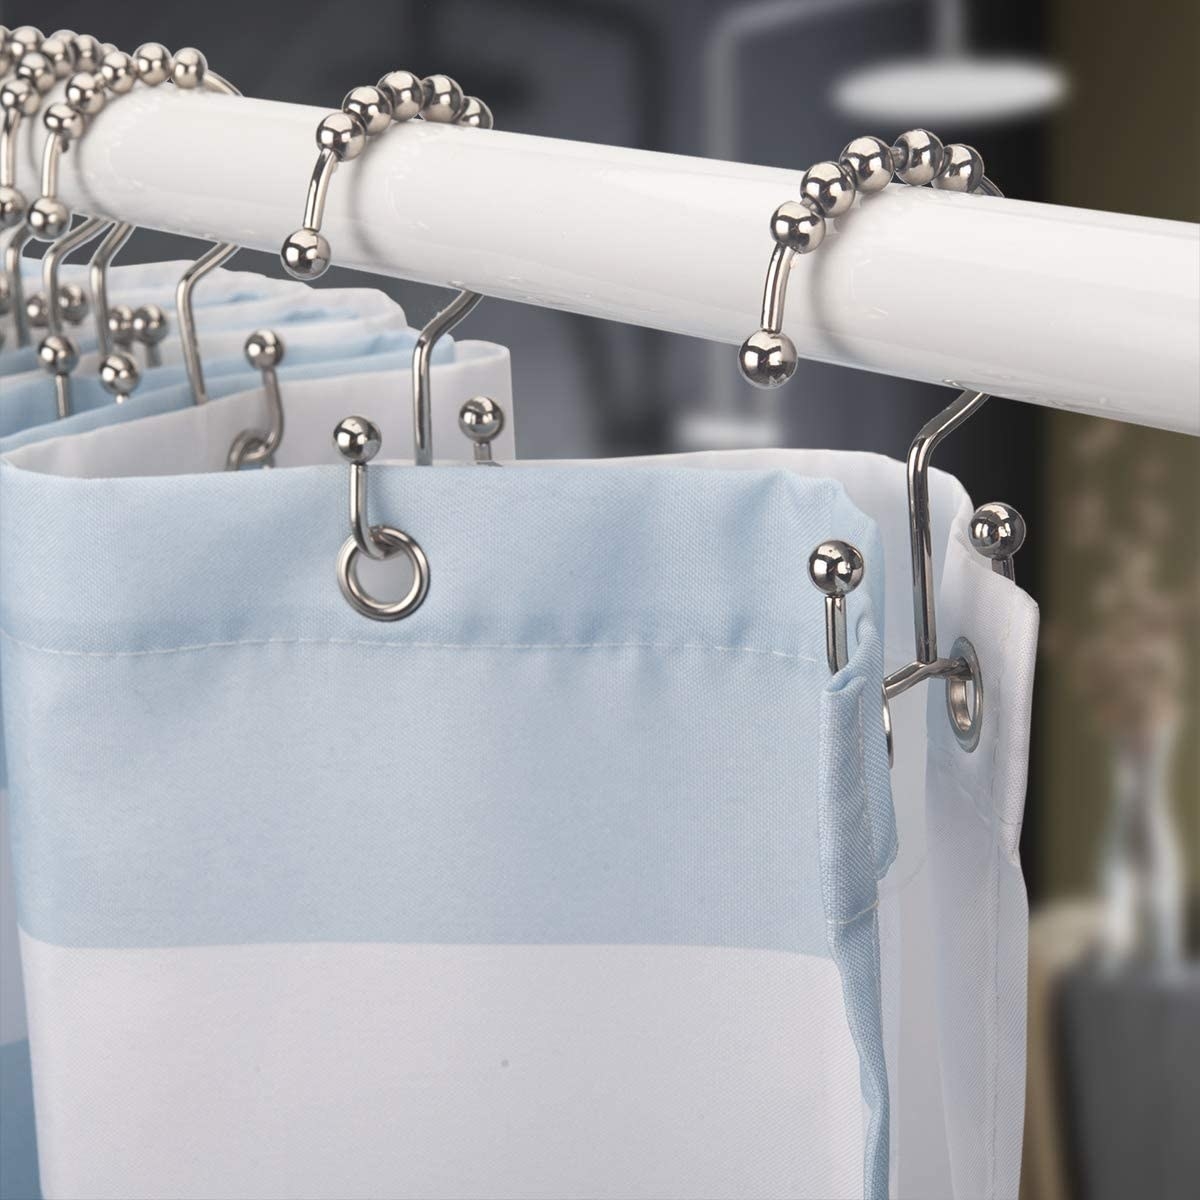 curtain rings with two separate hooks to hold liner and curtain